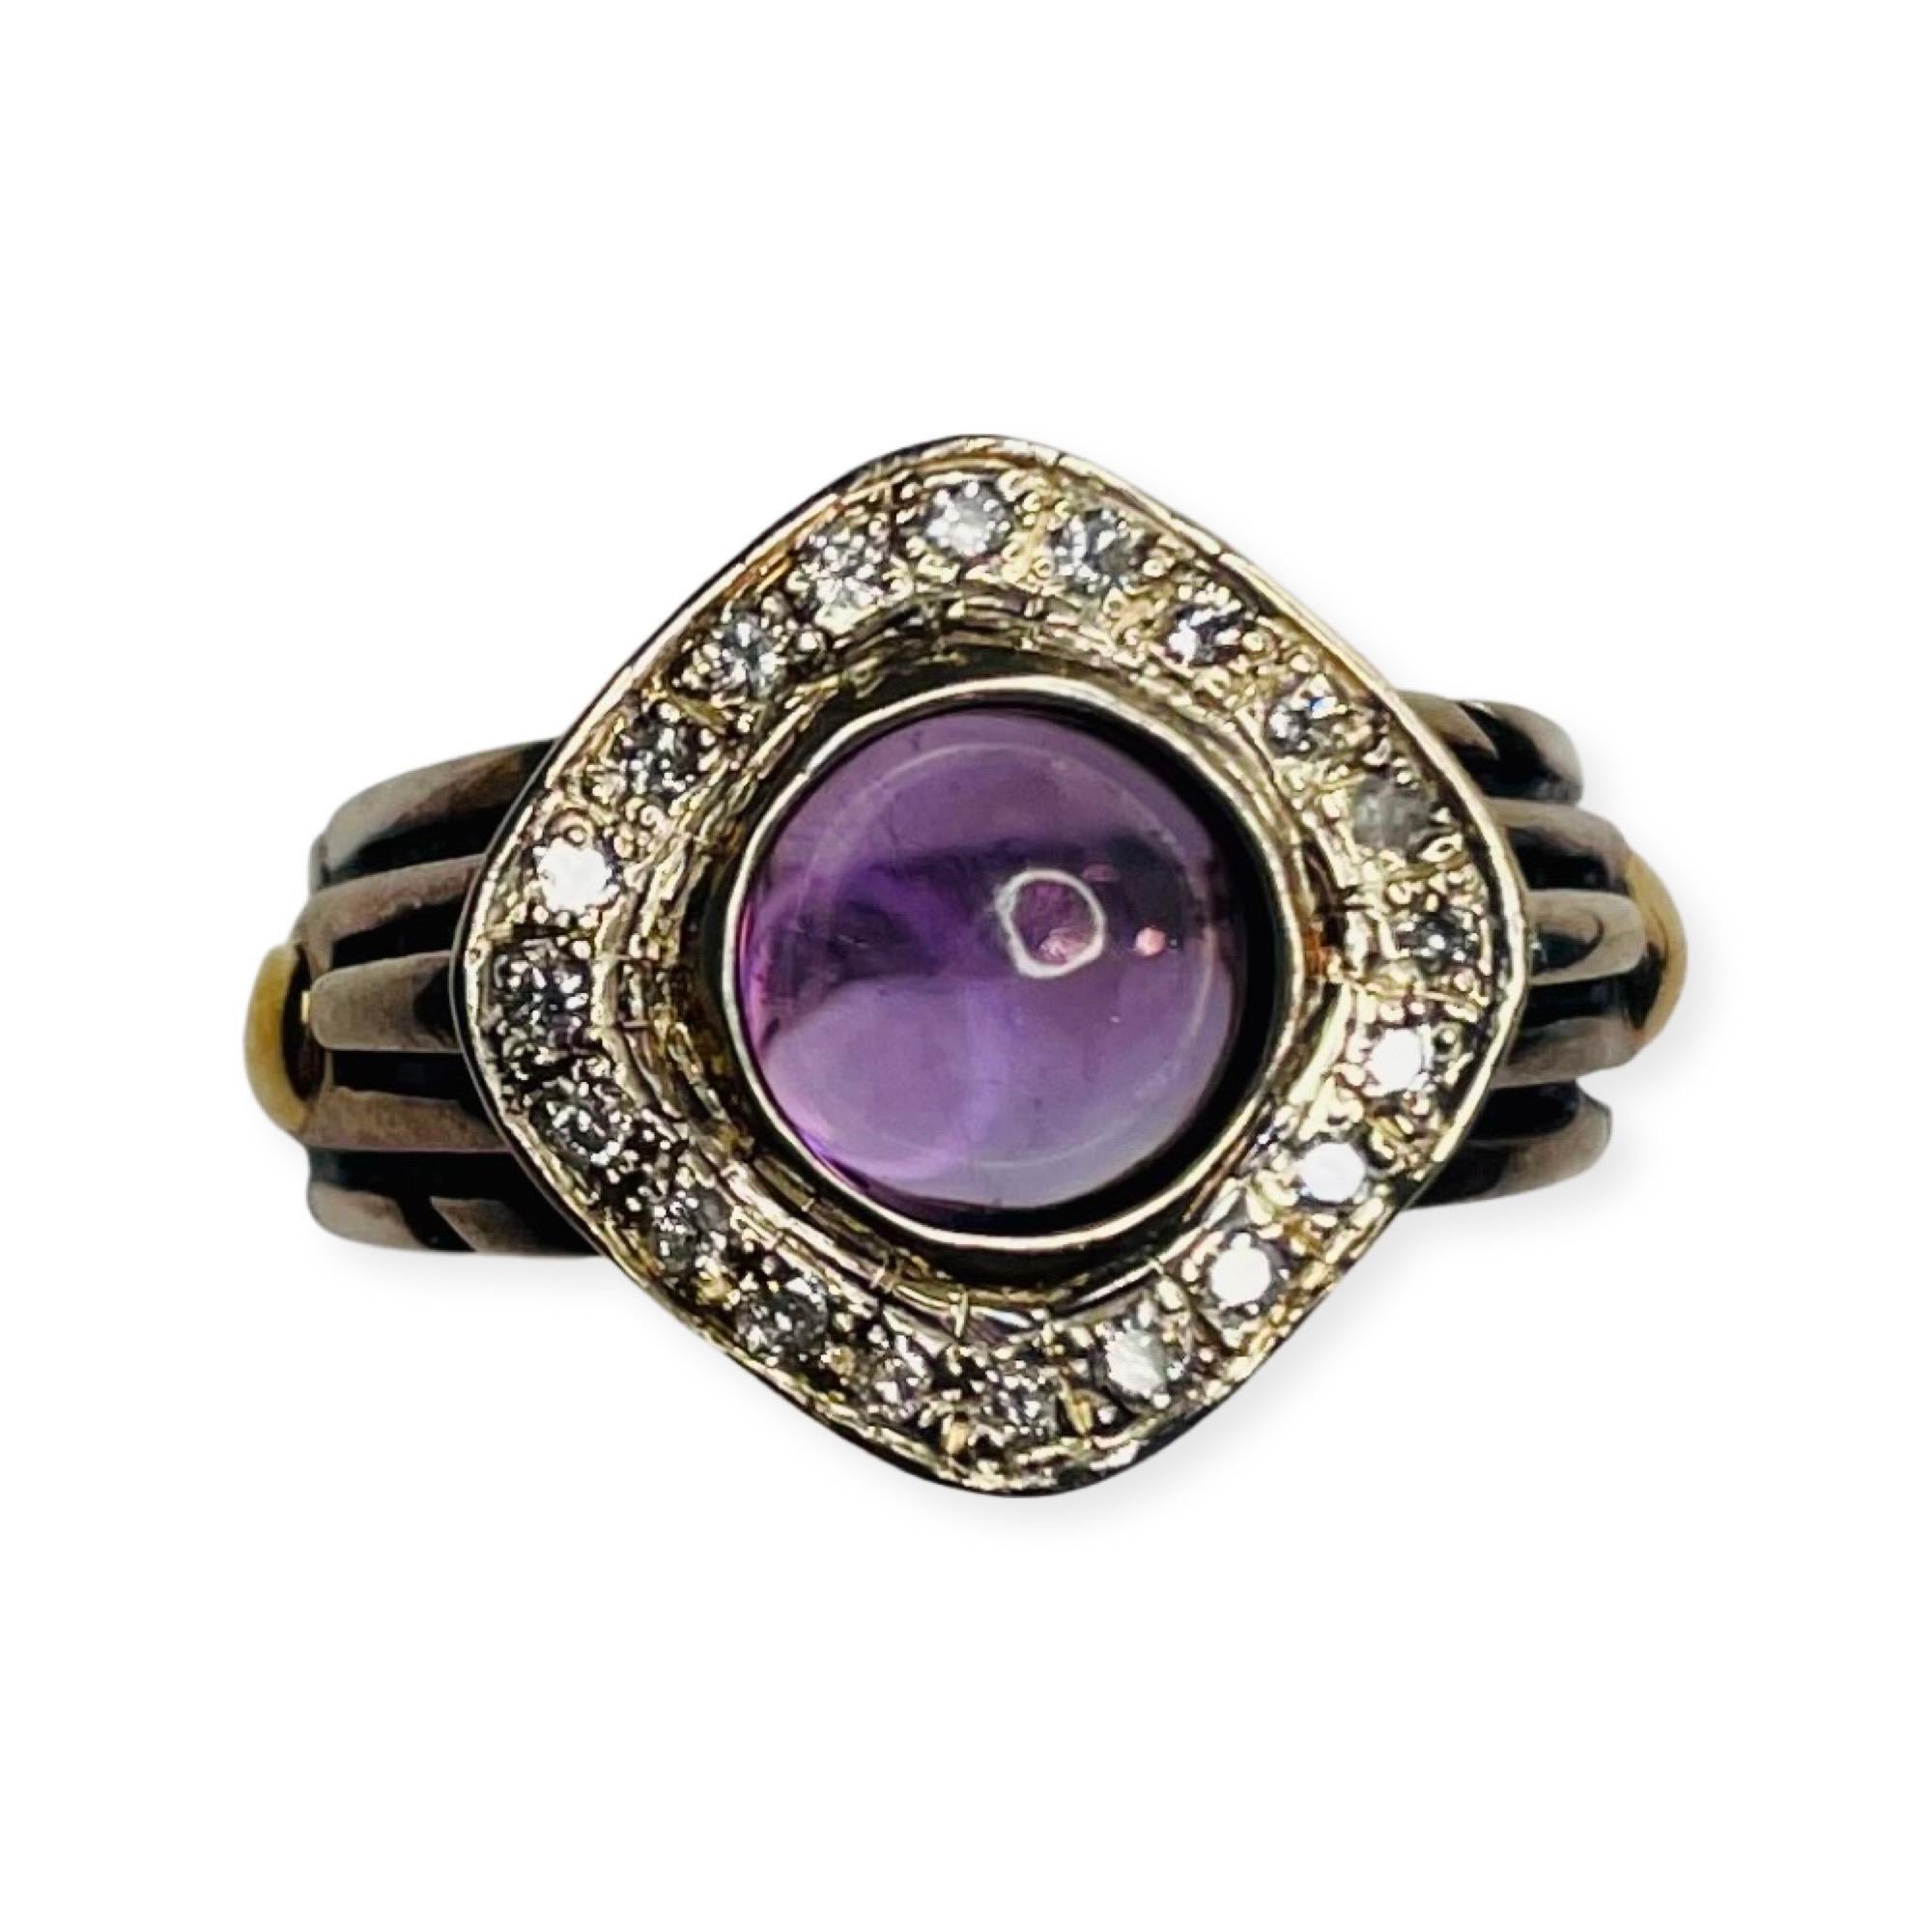 Amethyst And Diamond John Atencio Ring.  The ring is 18K yellow gold and sterling silver. The amethyst is bezel set and a round cabochon shape. There are 20 full cut round brilliant diamonds, prong set, for a total diamond weight of 0.20 carats. The